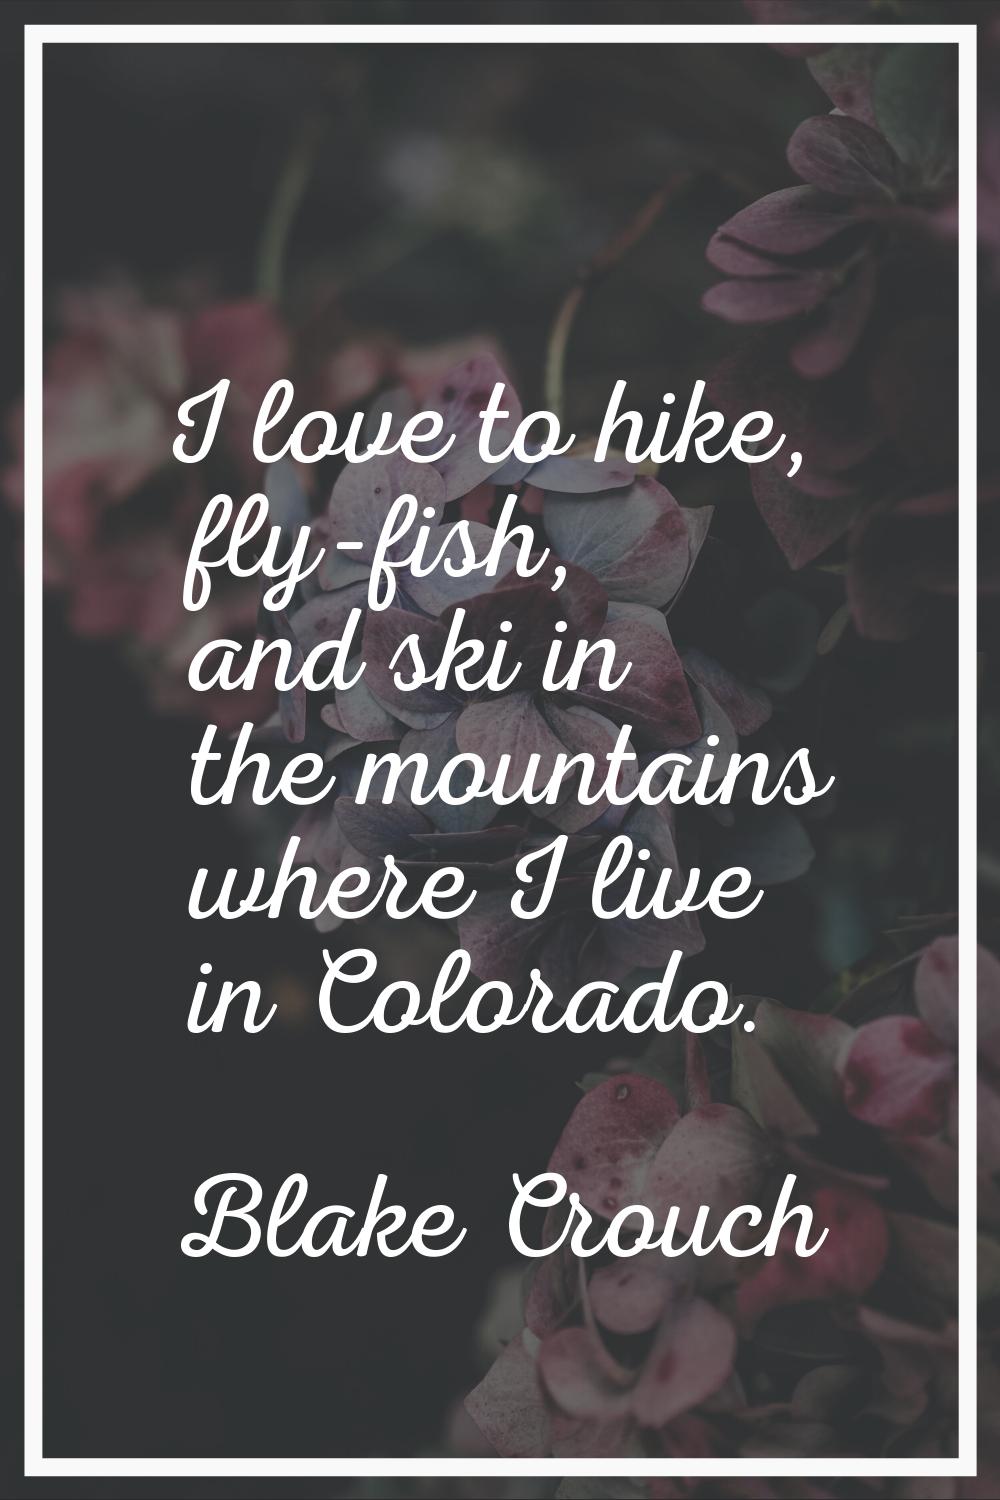 I love to hike, fly-fish, and ski in the mountains where I live in Colorado.